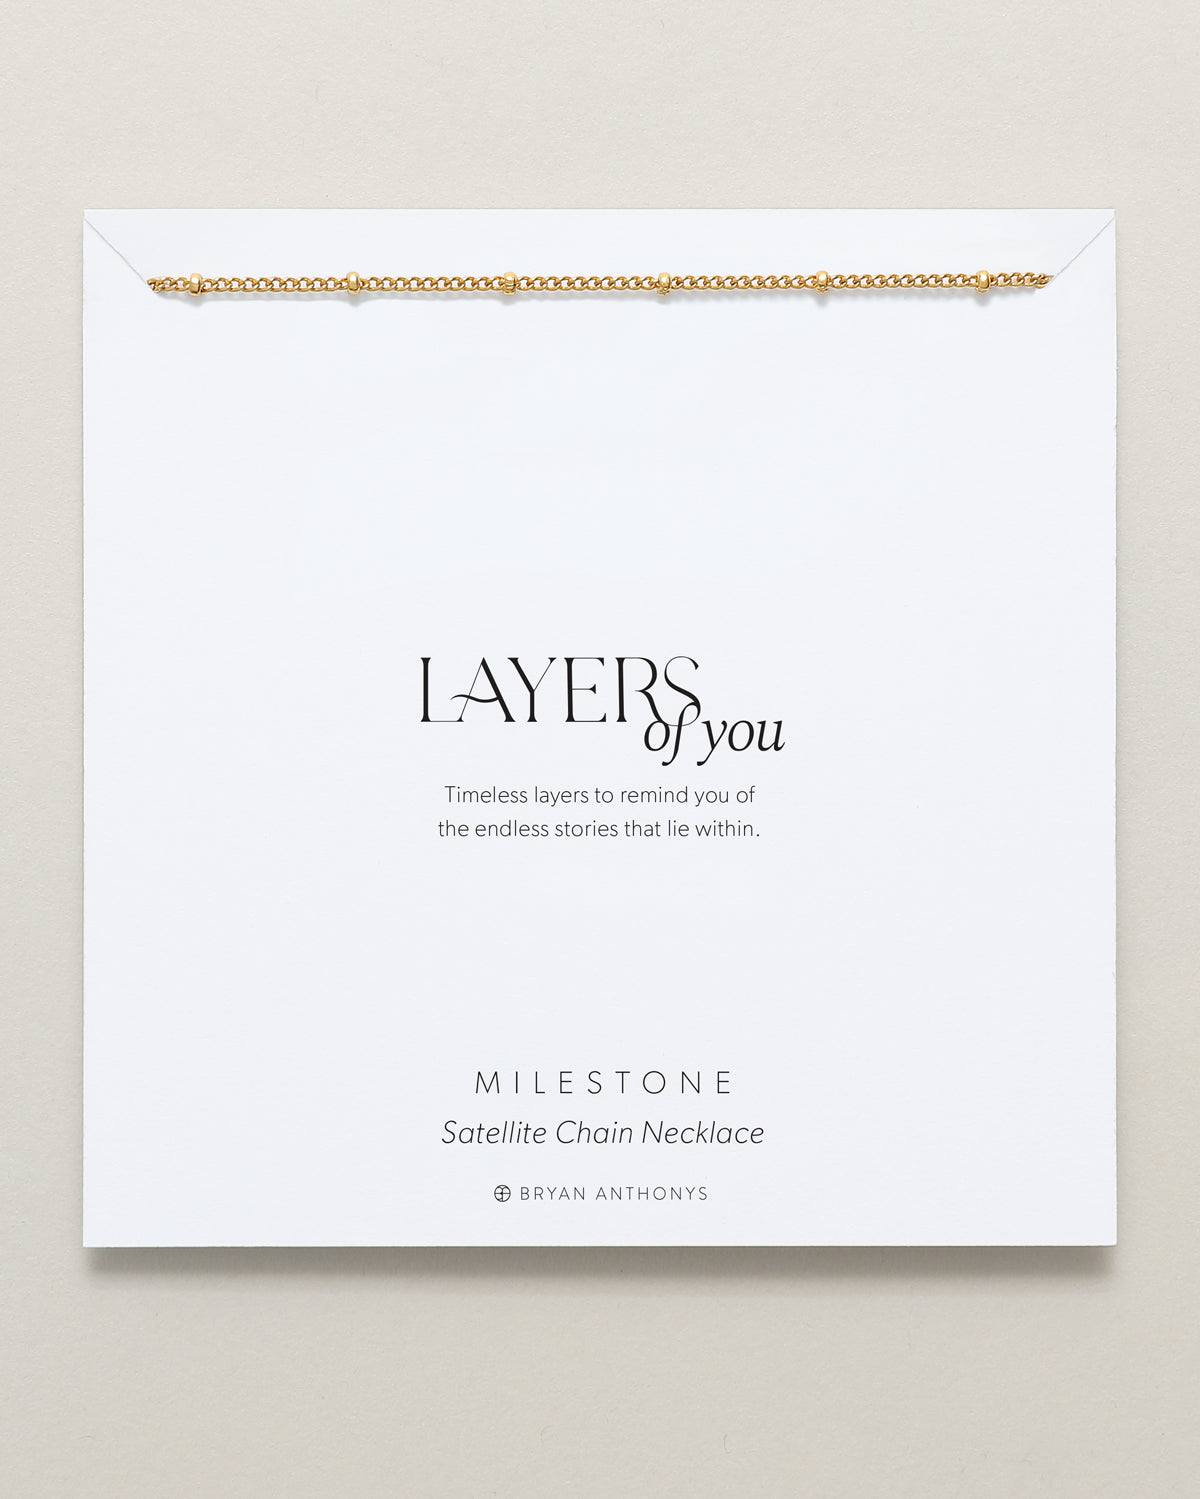 Bryan Anthonys Layers of You Collection Milestone Satellite Chain Necklace in Gold On Card